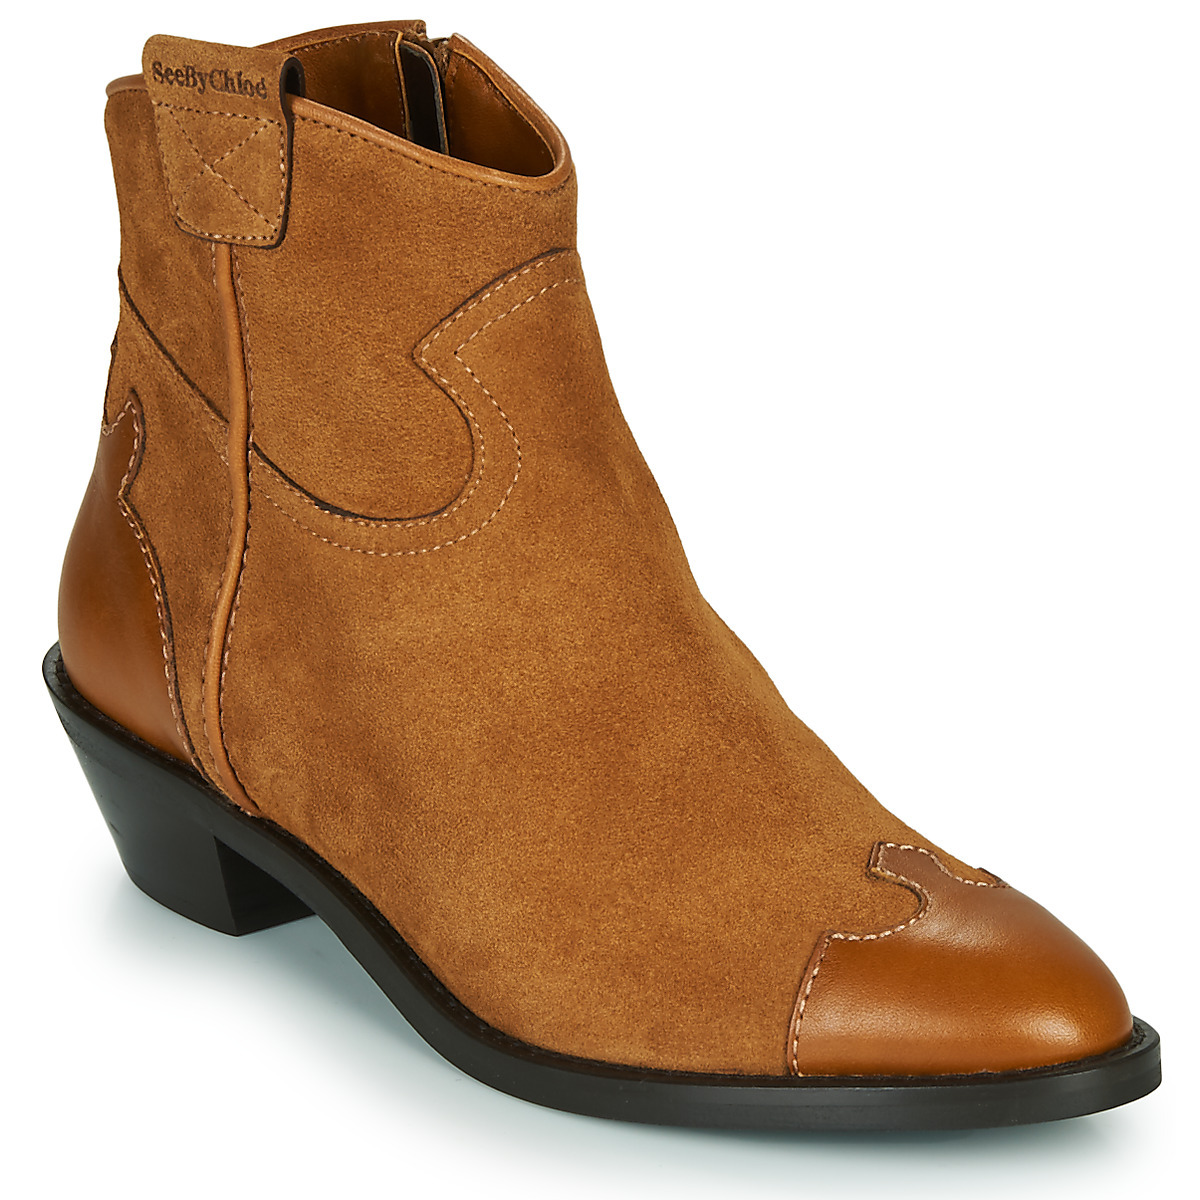 Chloé - Ankle Boots Brown - Spartoo - Woman GOOFASH